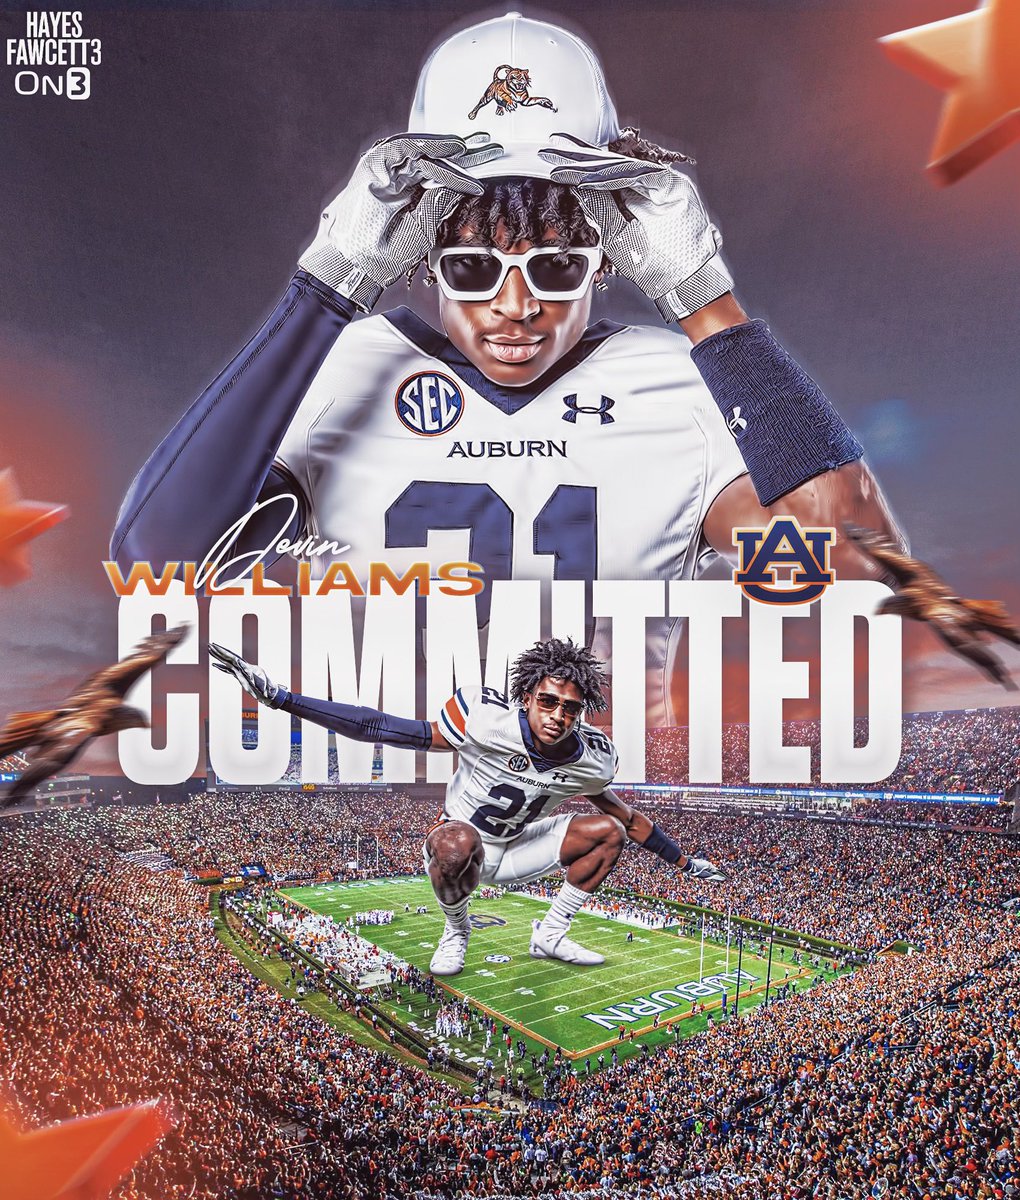 100%Committed! I’m Home, War Eagle 🦅. @Hayesfawcett3 @therealkwat